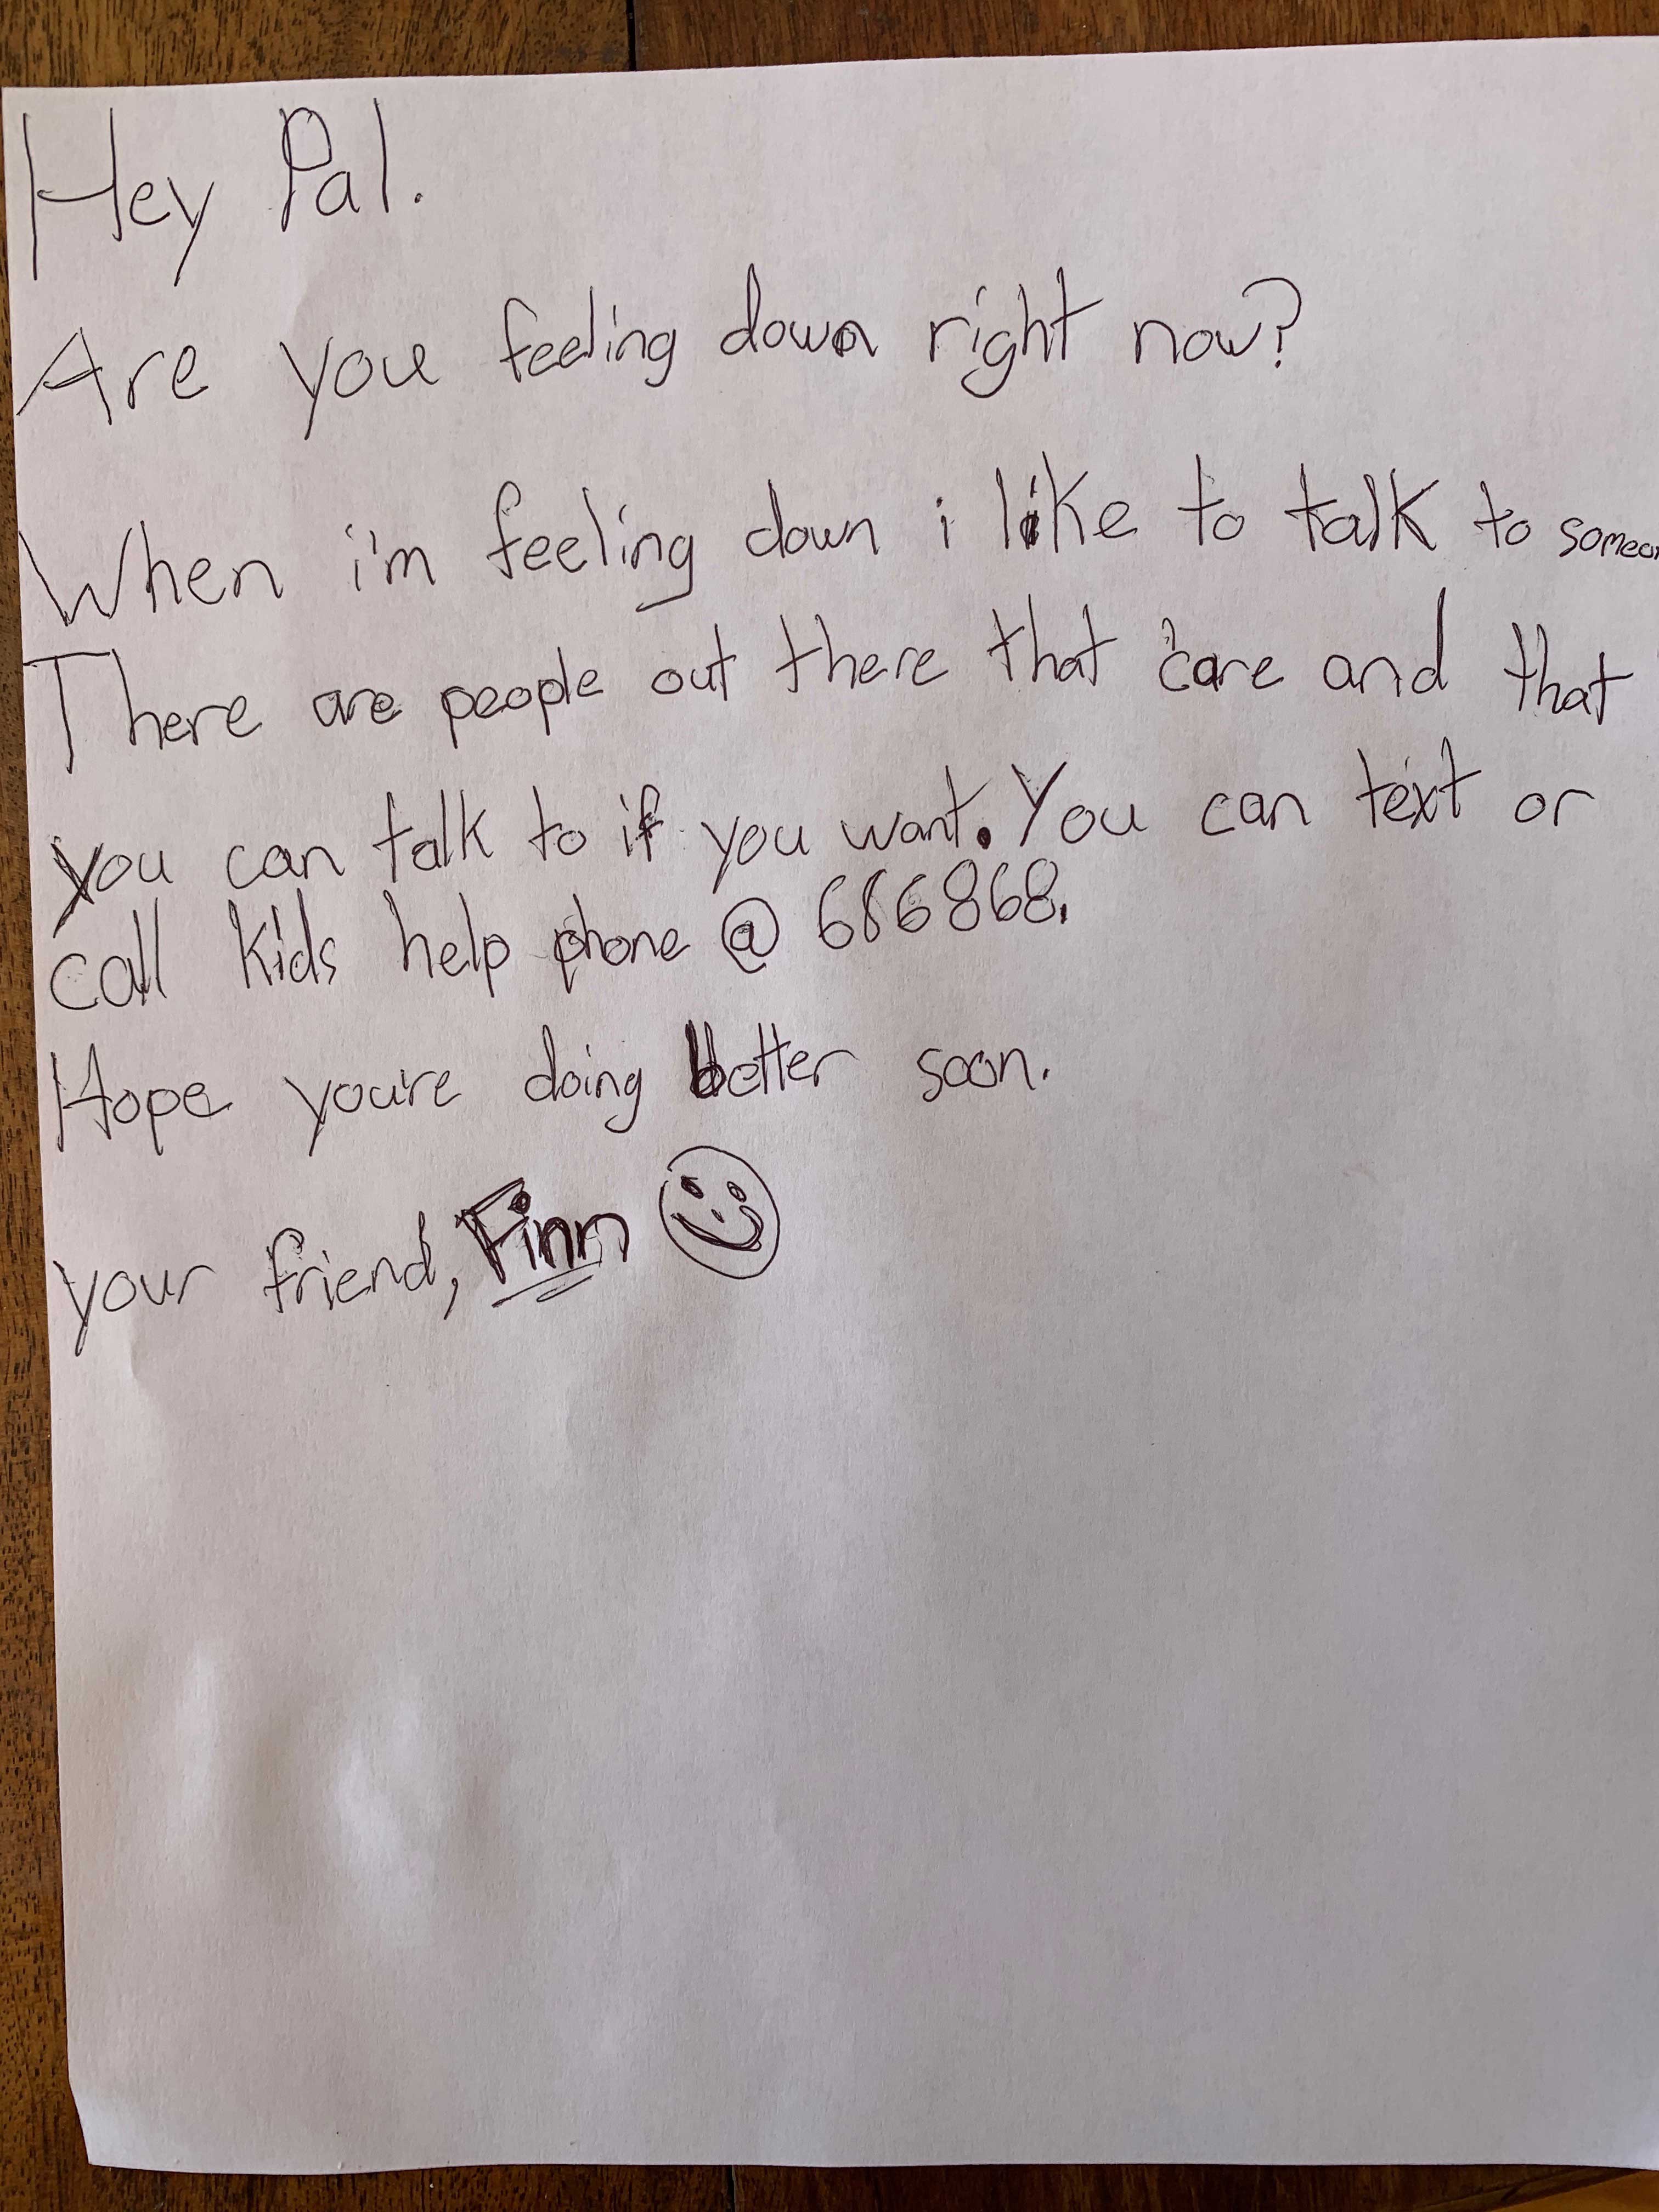 Letters of support from kids like you during COVID-14 - Kids Help